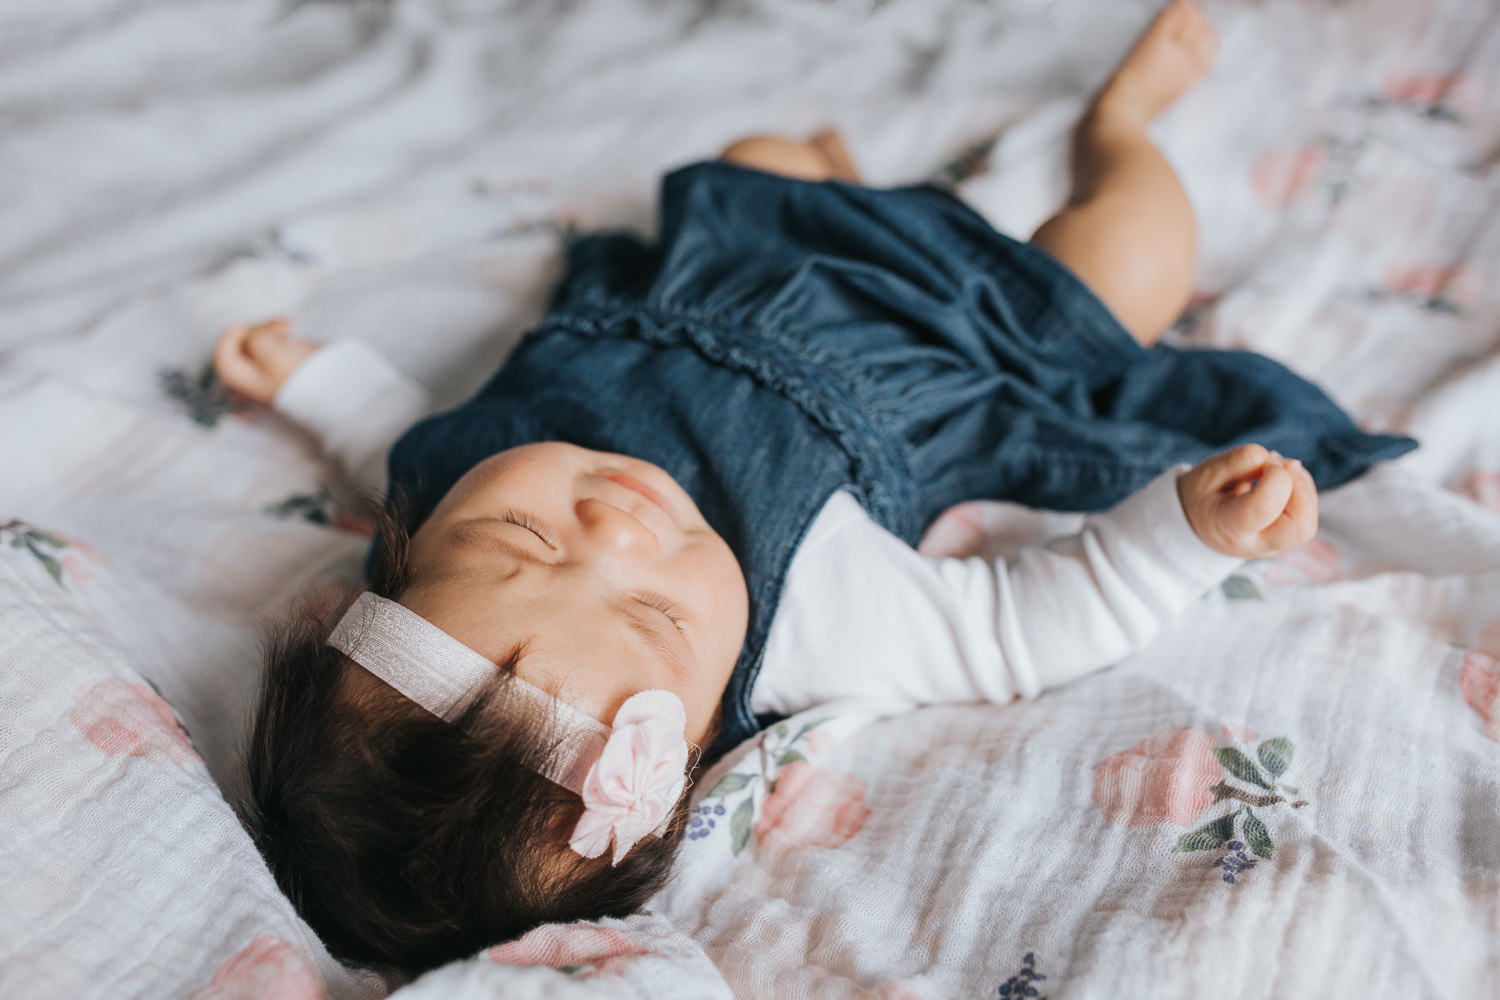 3 month old baby girl in blue dress lying on floral blanket - Barrie Lifestyle Photography